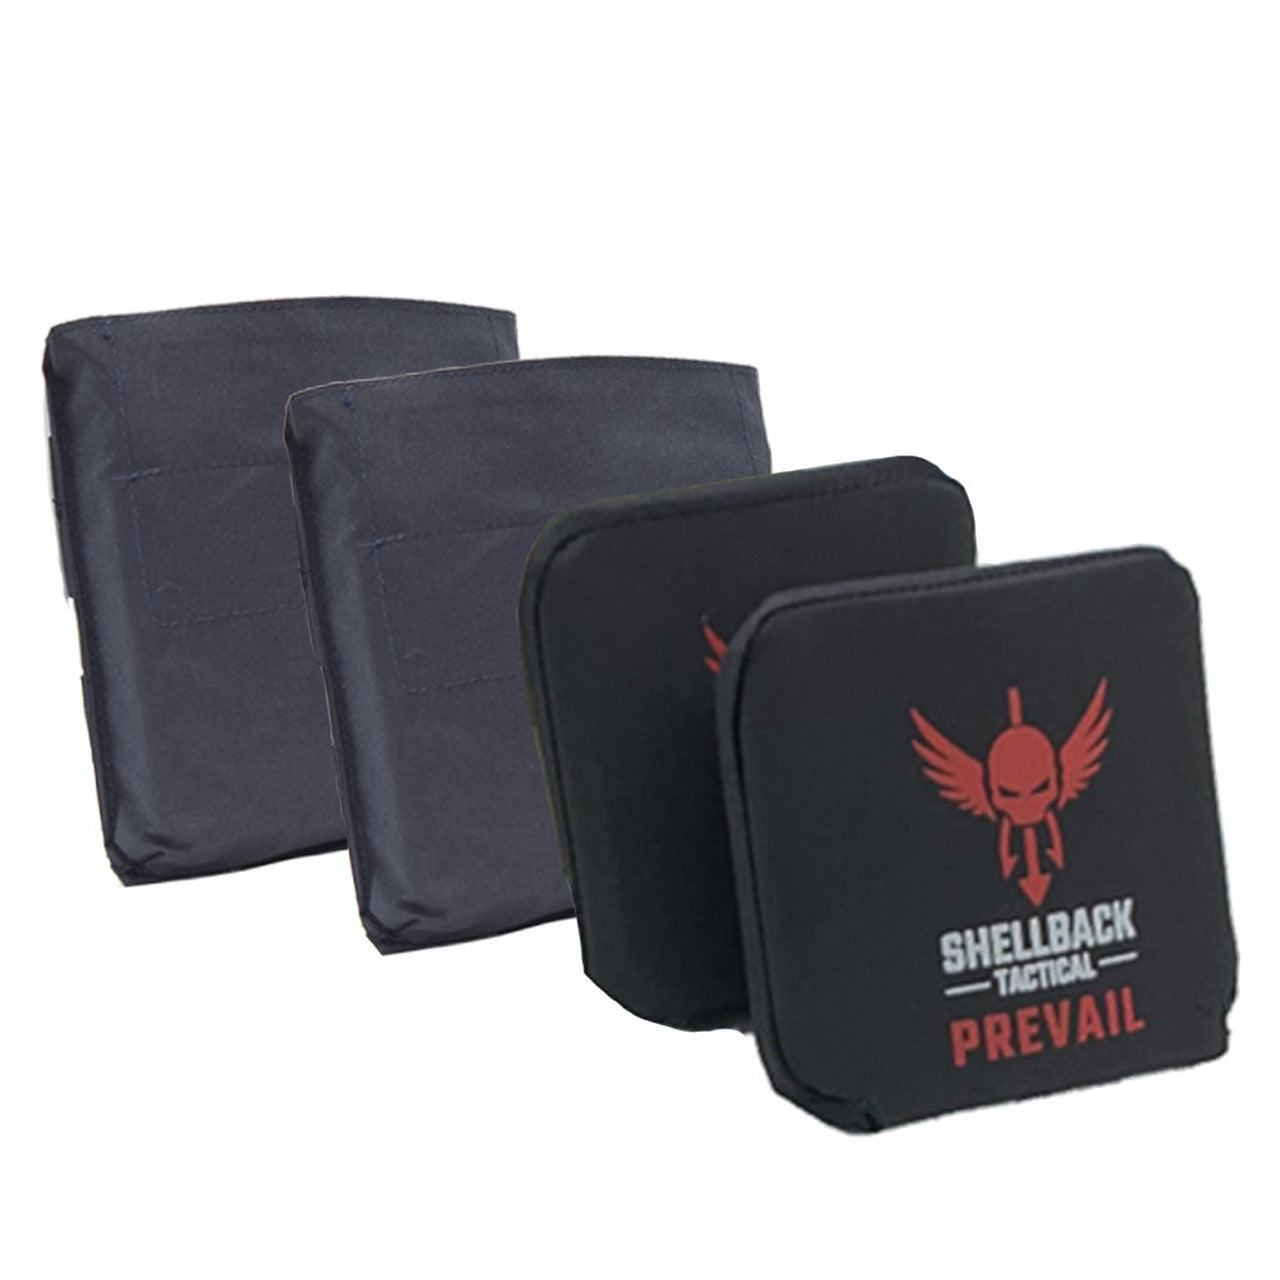 Shellback Tactical Side Armor Plate Kit with Level IV Model 4S17 Armor Plates.